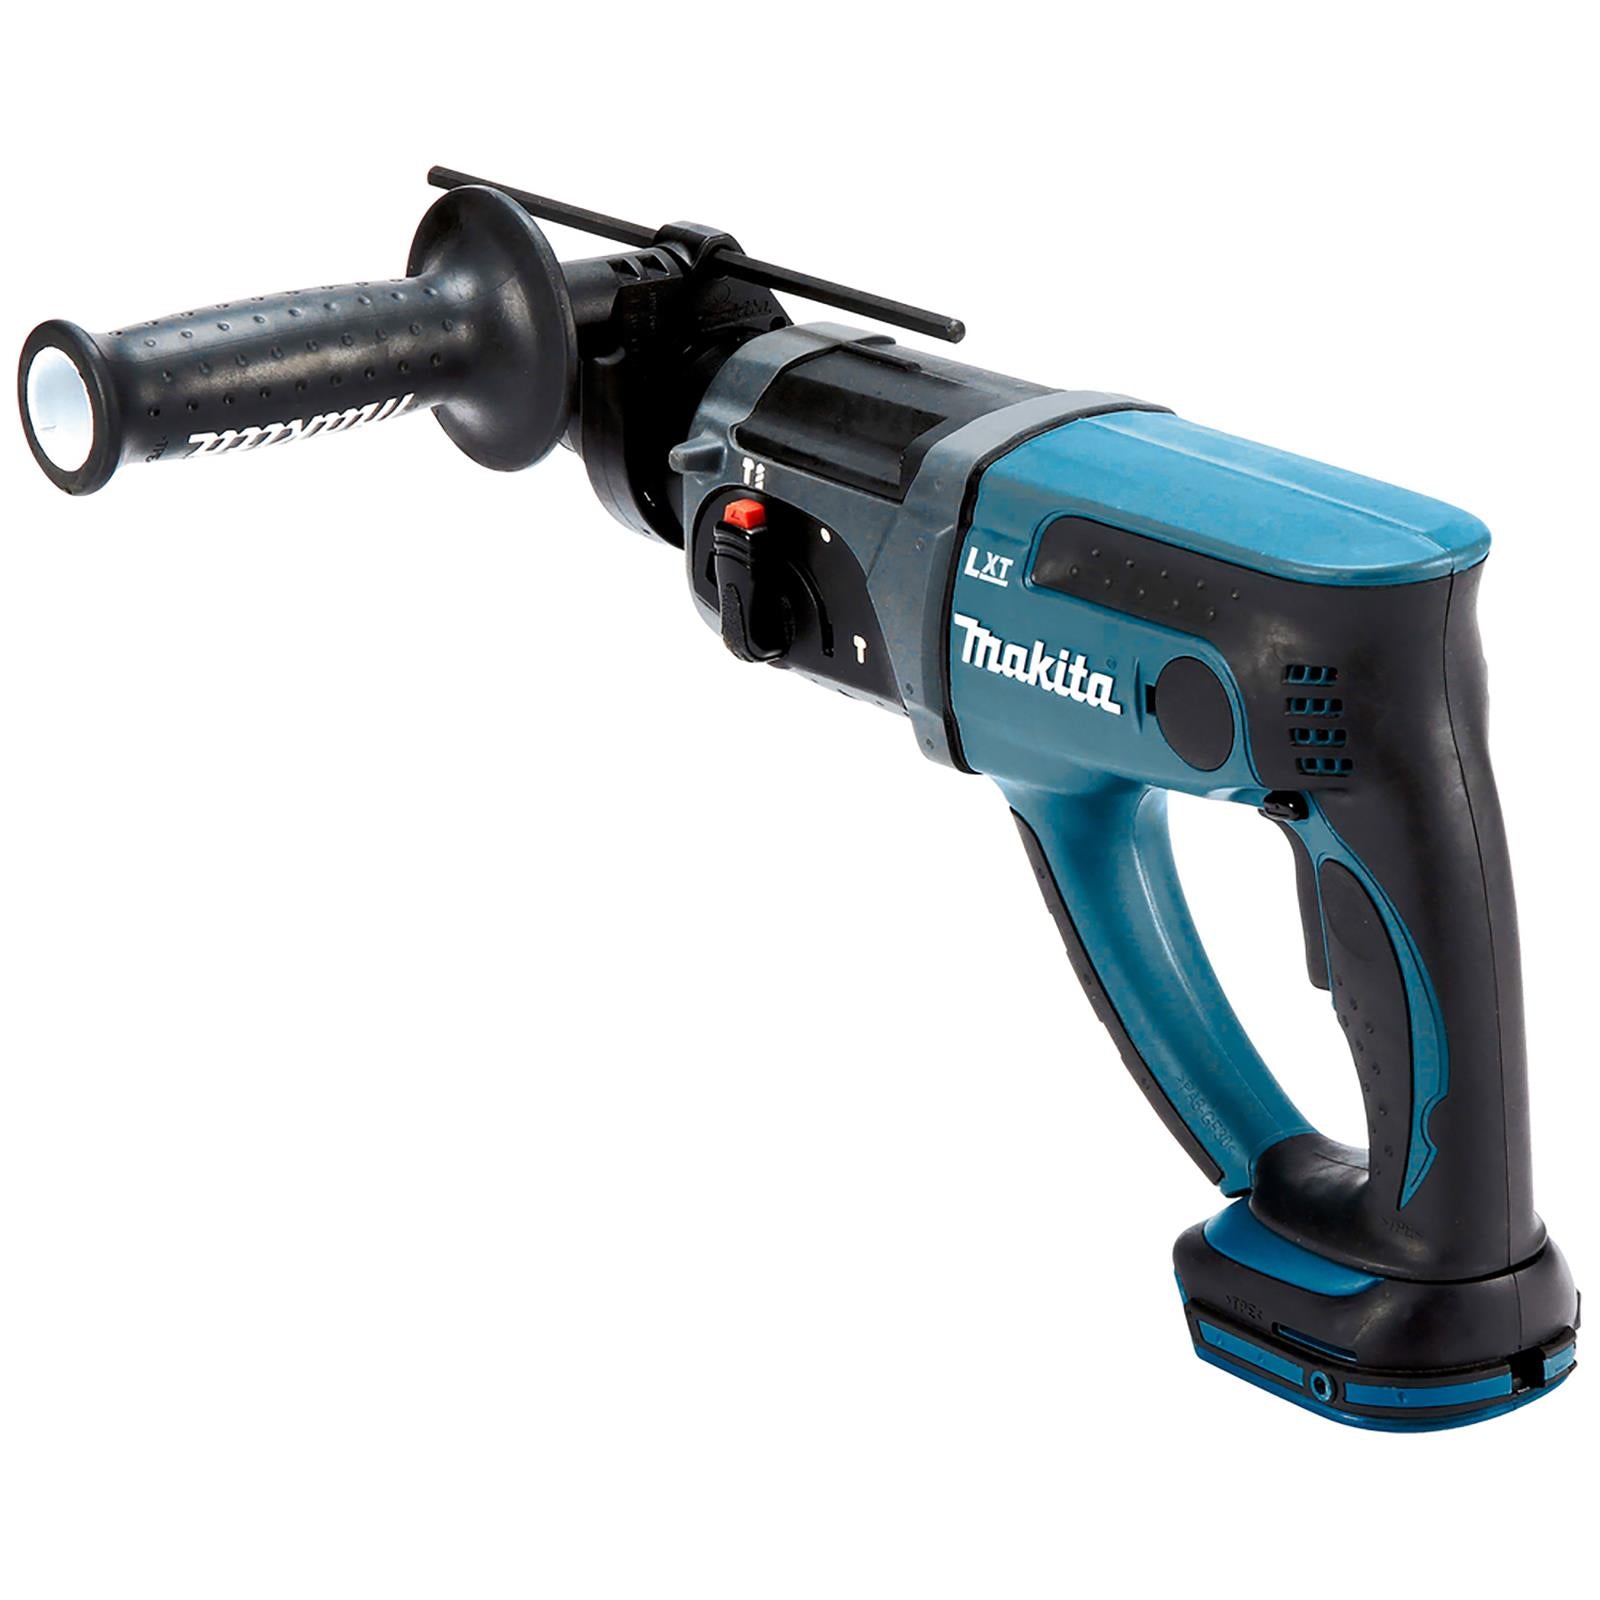 Makita Rotary Hammer Drill SDS Plus 18V LXT Cordless 20mm Capacity Concrete DHR202Z Body Only